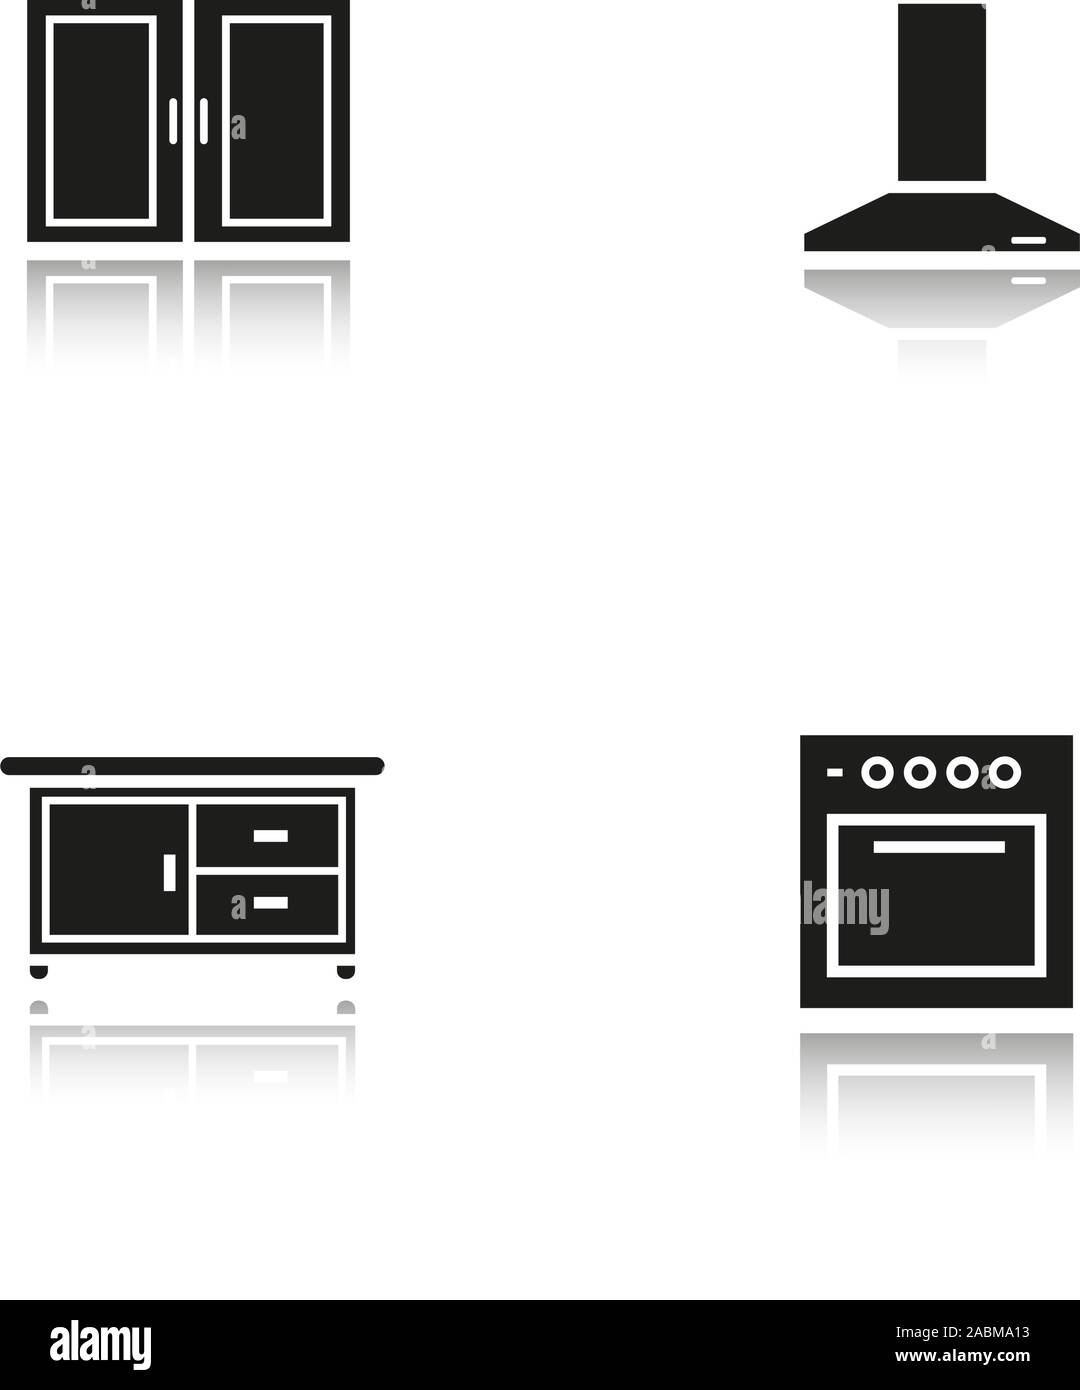 Kitchen interior drop shadow black icons set. Range hood, stove, kitchen counter and cabinet. Isolated vector illustrations Stock Vector